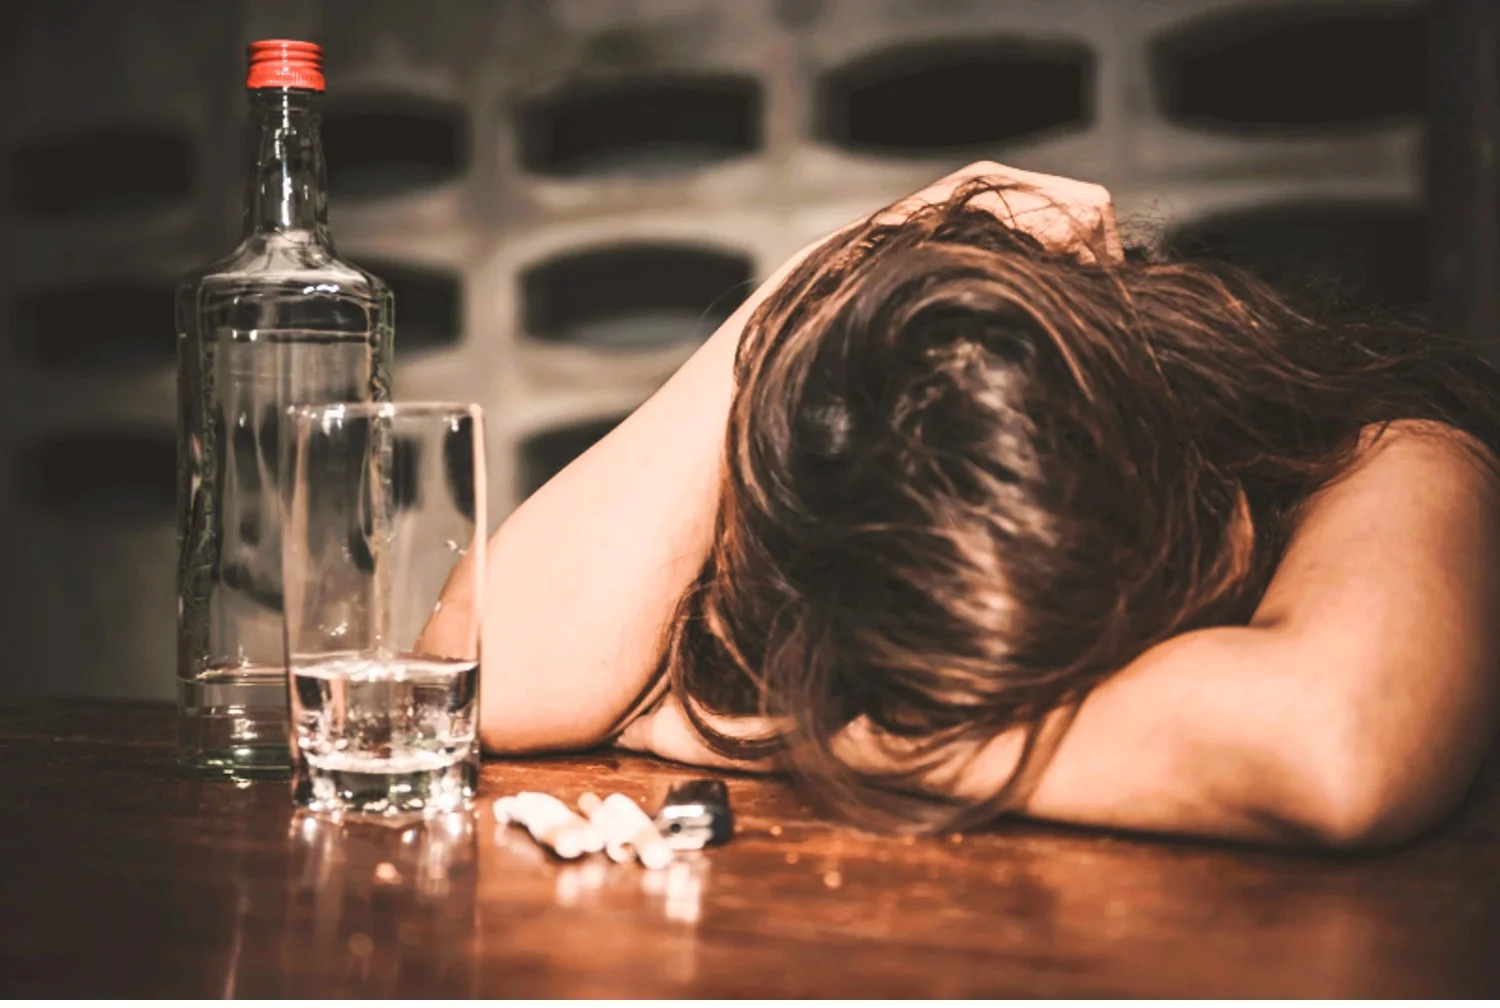 Depressed woman rests head on bar in front of an empty alcohol bottle, glass with alcohol, and pile of cigarettes